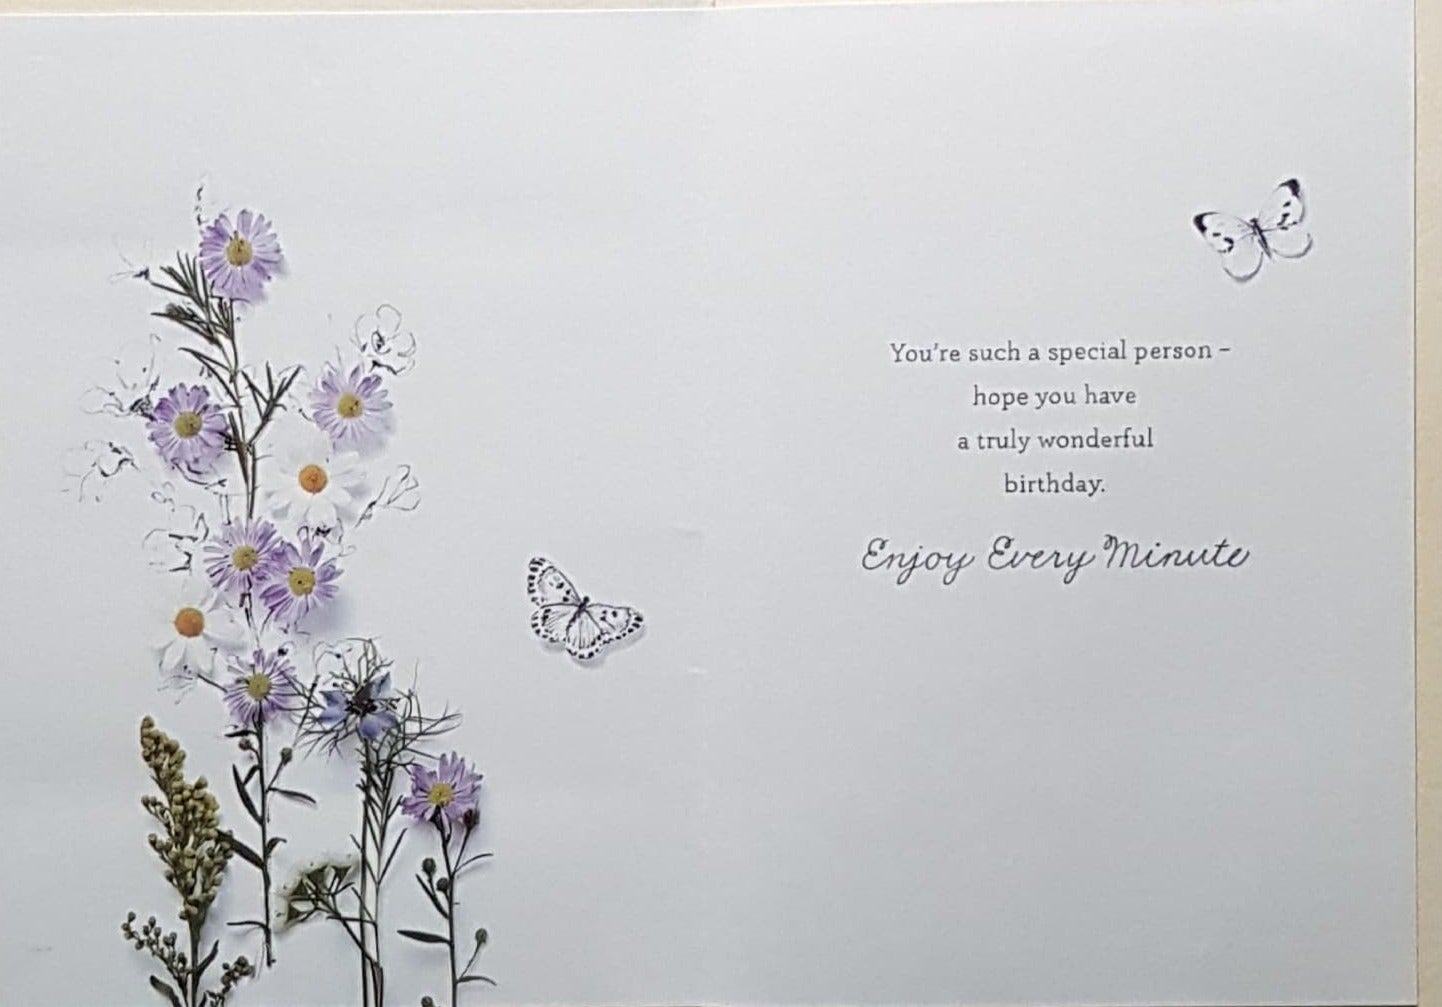 Birthday Card - White Butterfly With Purple Flowers On A Pink Background